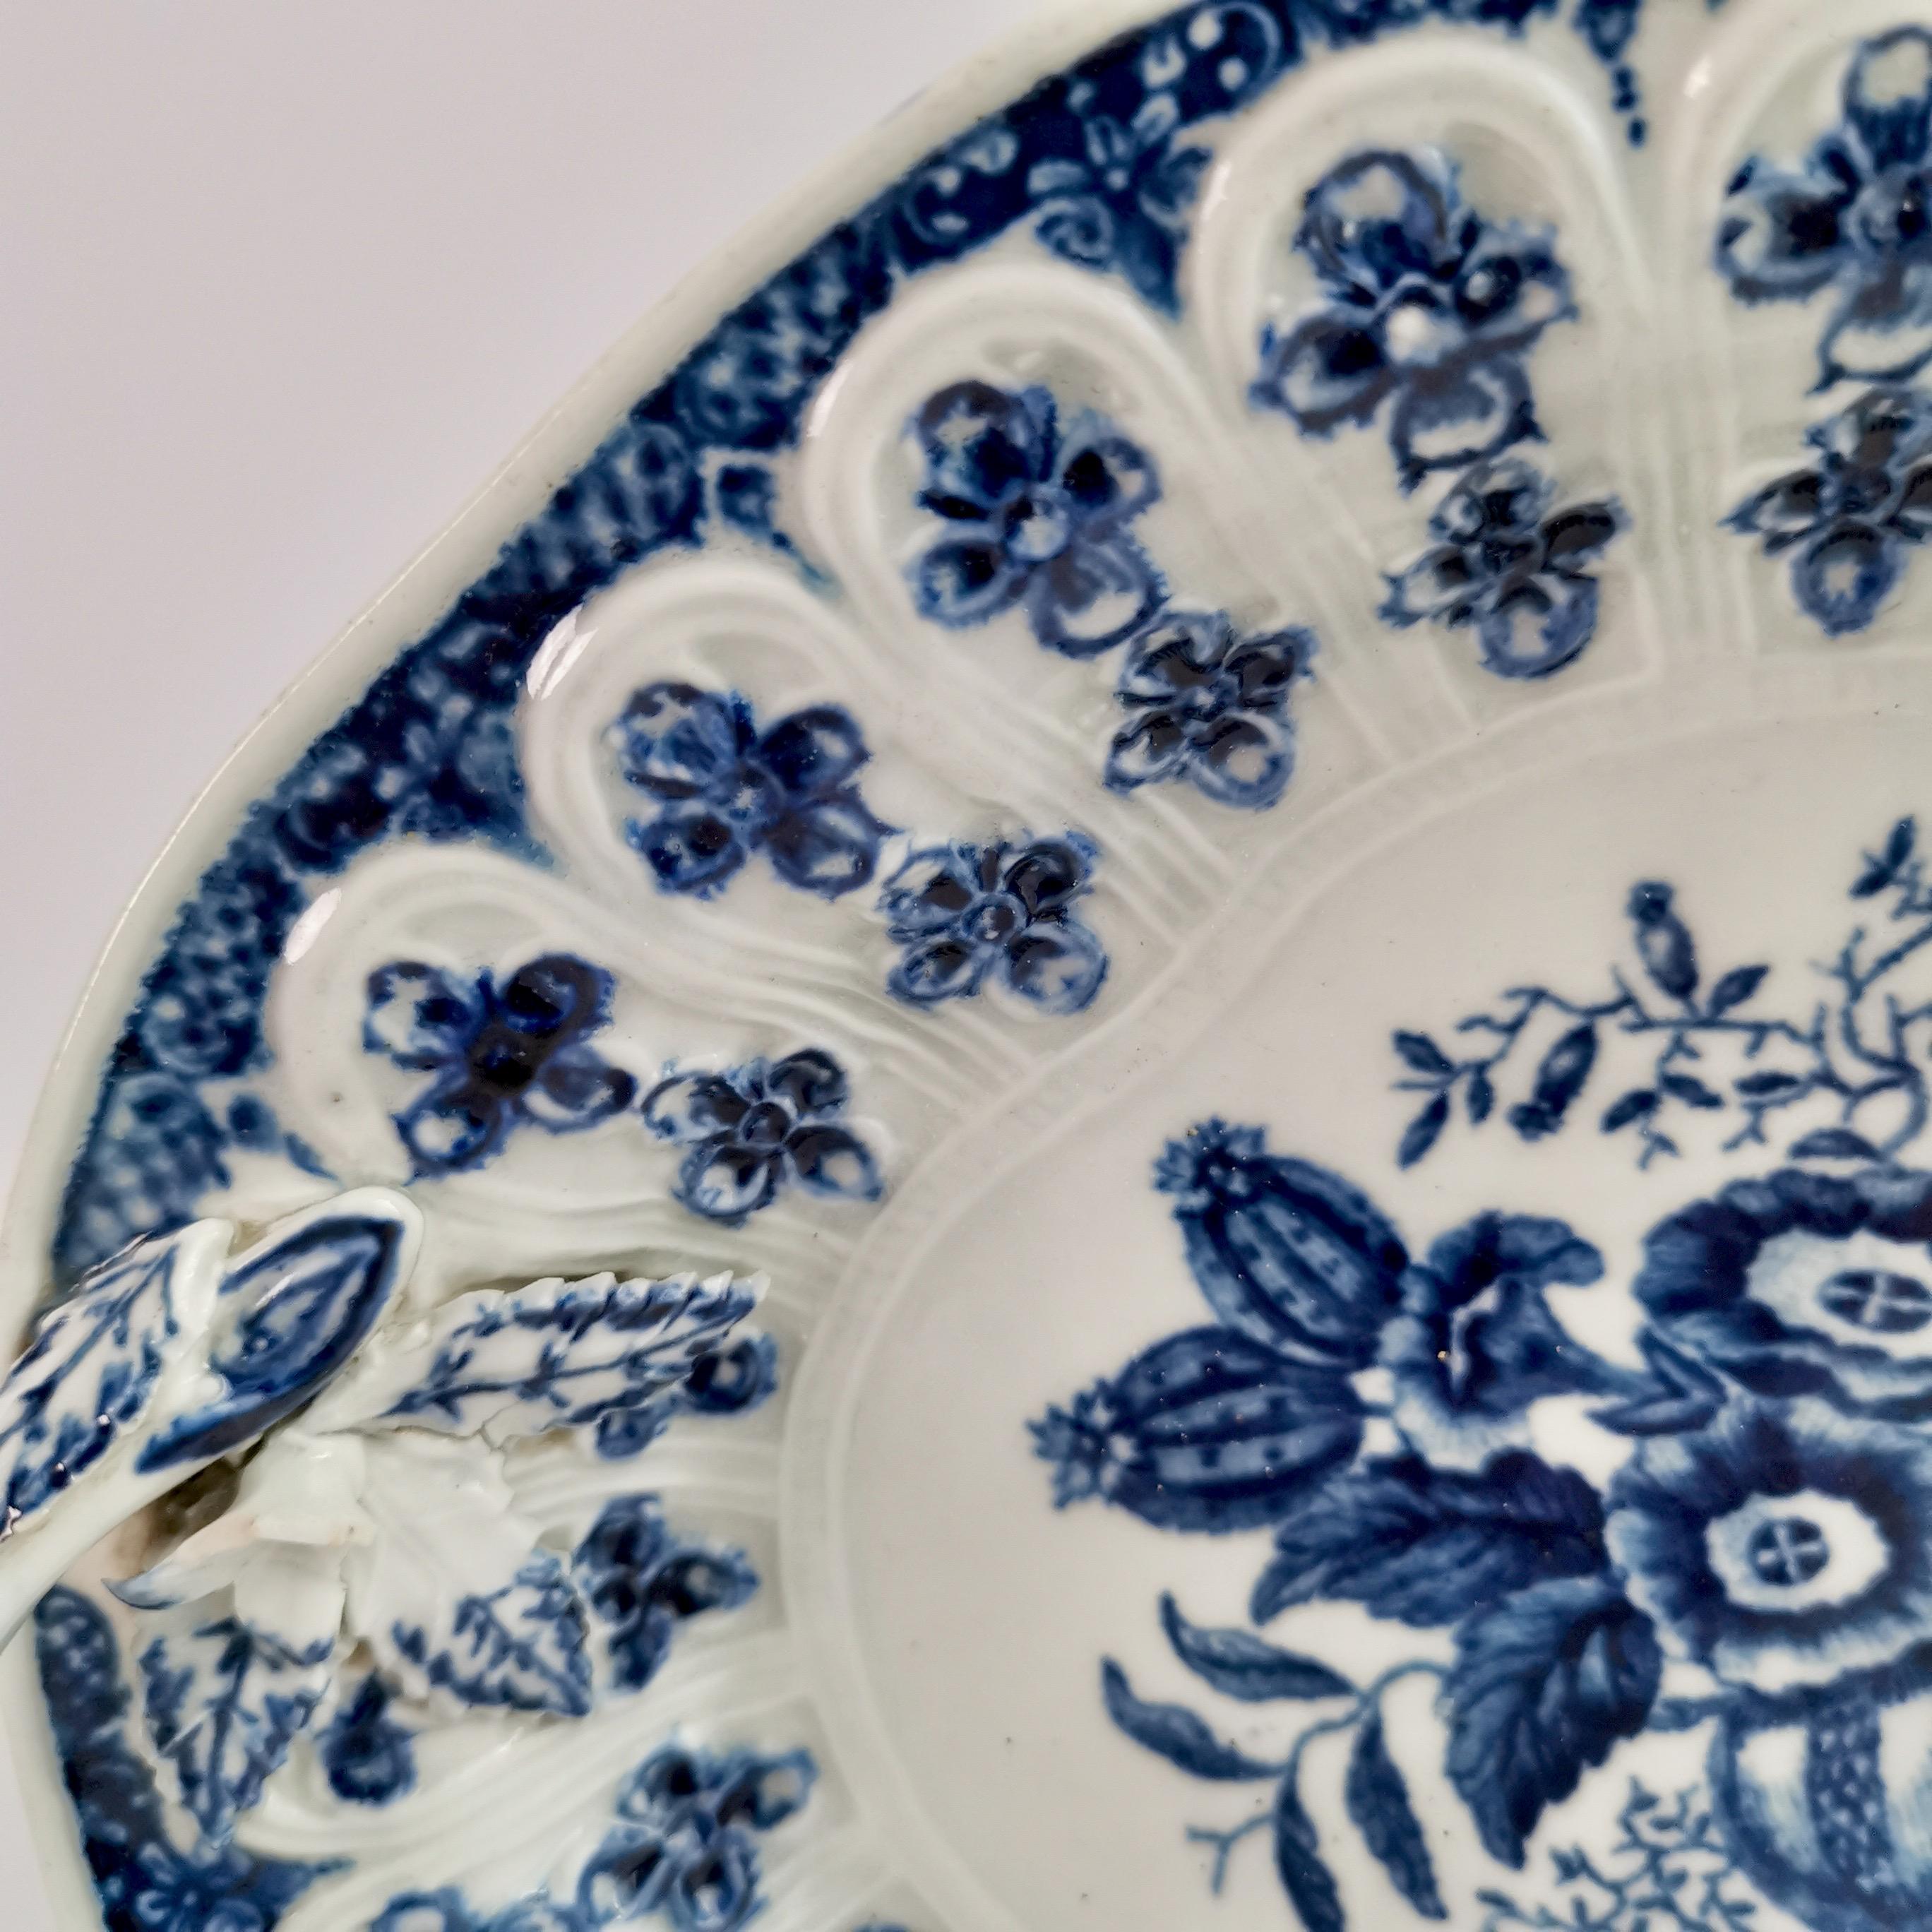 Hand-Painted Worcester Porcelain Dish, Blue on White Pine Cone Pattern, circa 1770